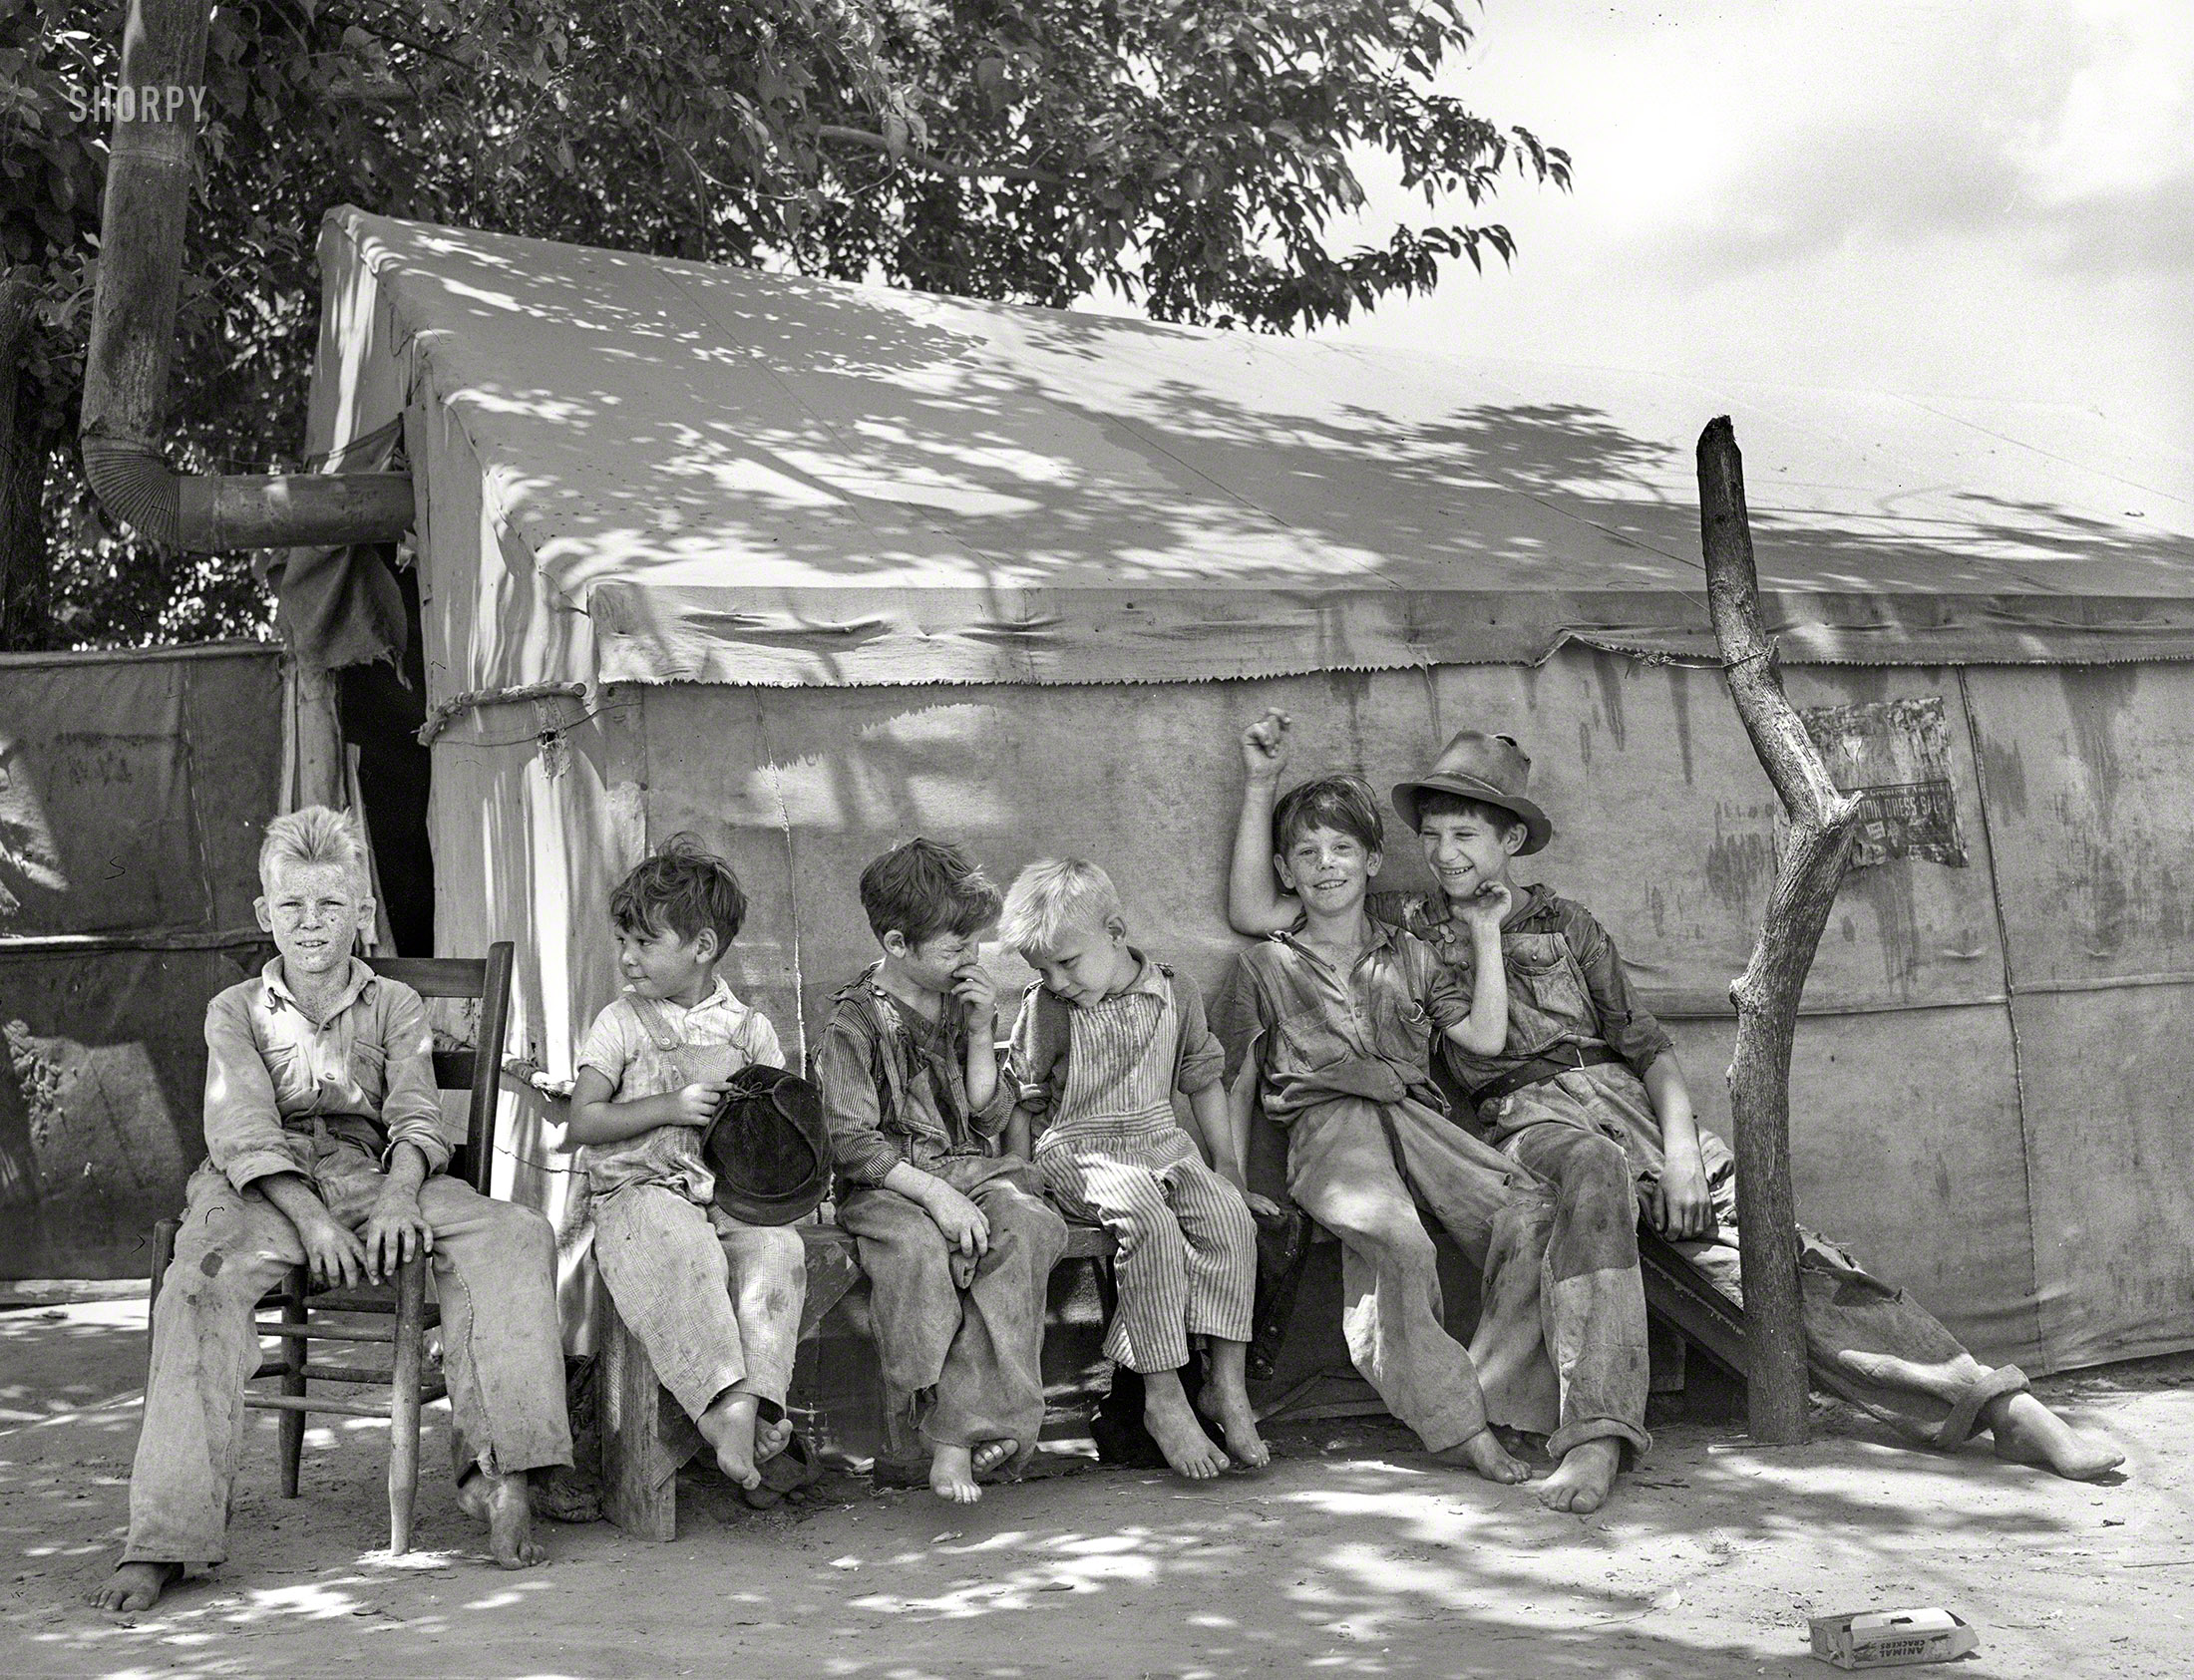 June 1939. "Sons of day laborers in tent camp near Webbers Falls, Oklahoma. Some of their fathers were agricultural workers and some were dispossessed tenant farmers now on Works Progress Administration. The WPA work is holding many of these former tenant farmers in their communities, but they are all potential migrants. None of these children had ever attended school." Photo by Russell Lee for the Farm Security Administration. View full size.